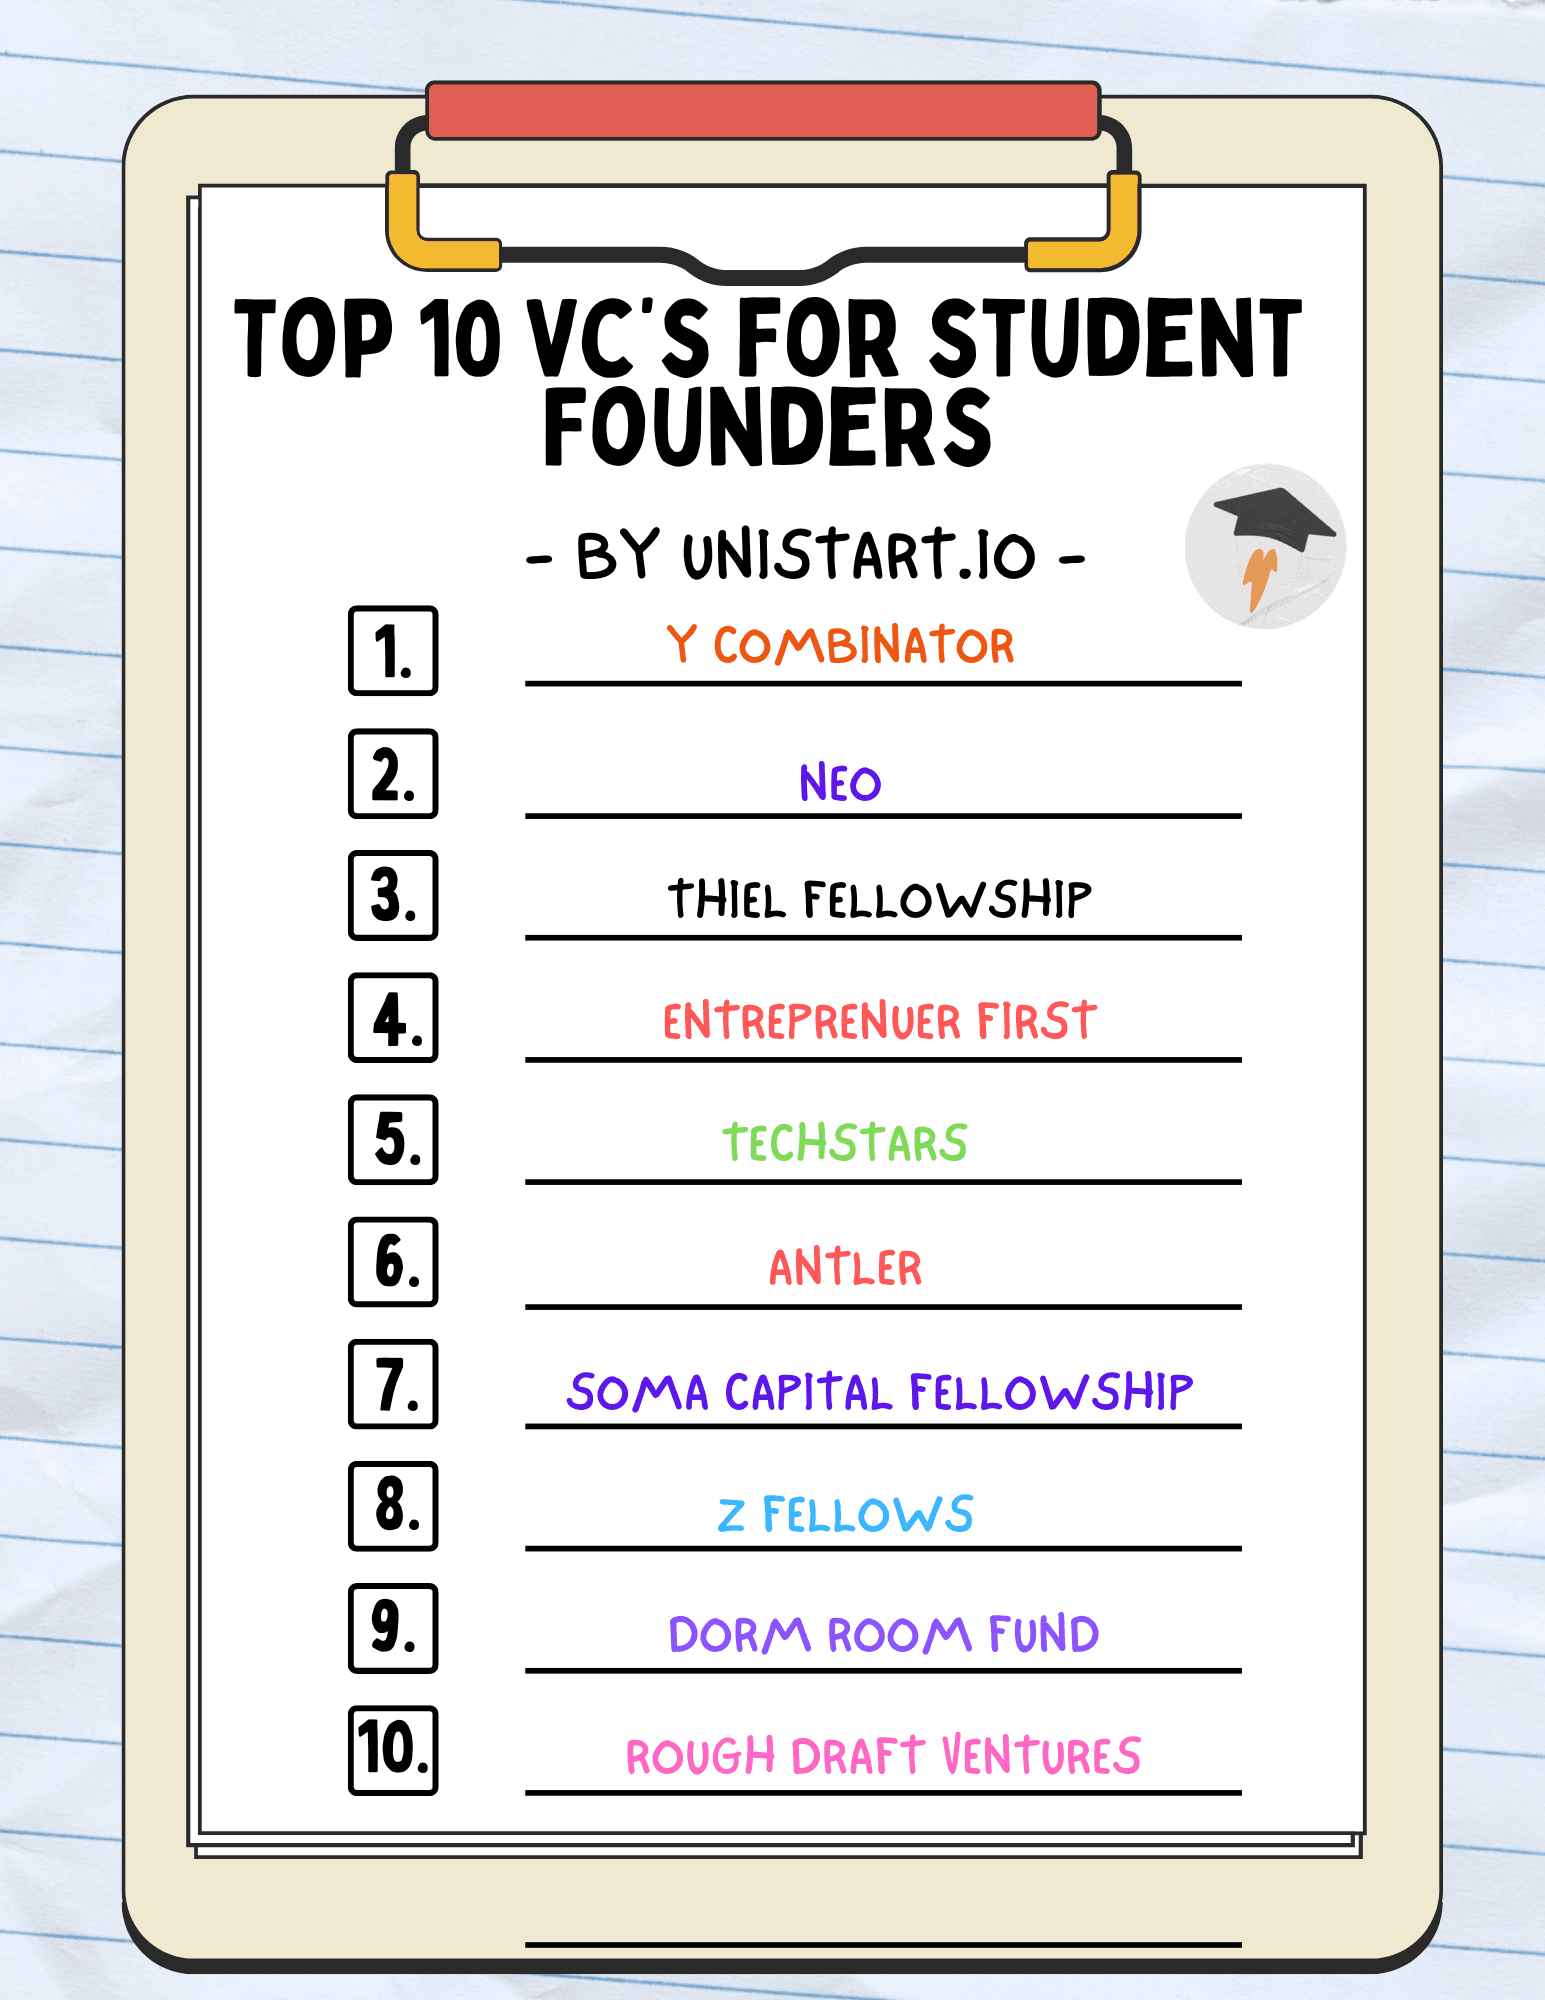 Top 10 VCs for Student Founders 